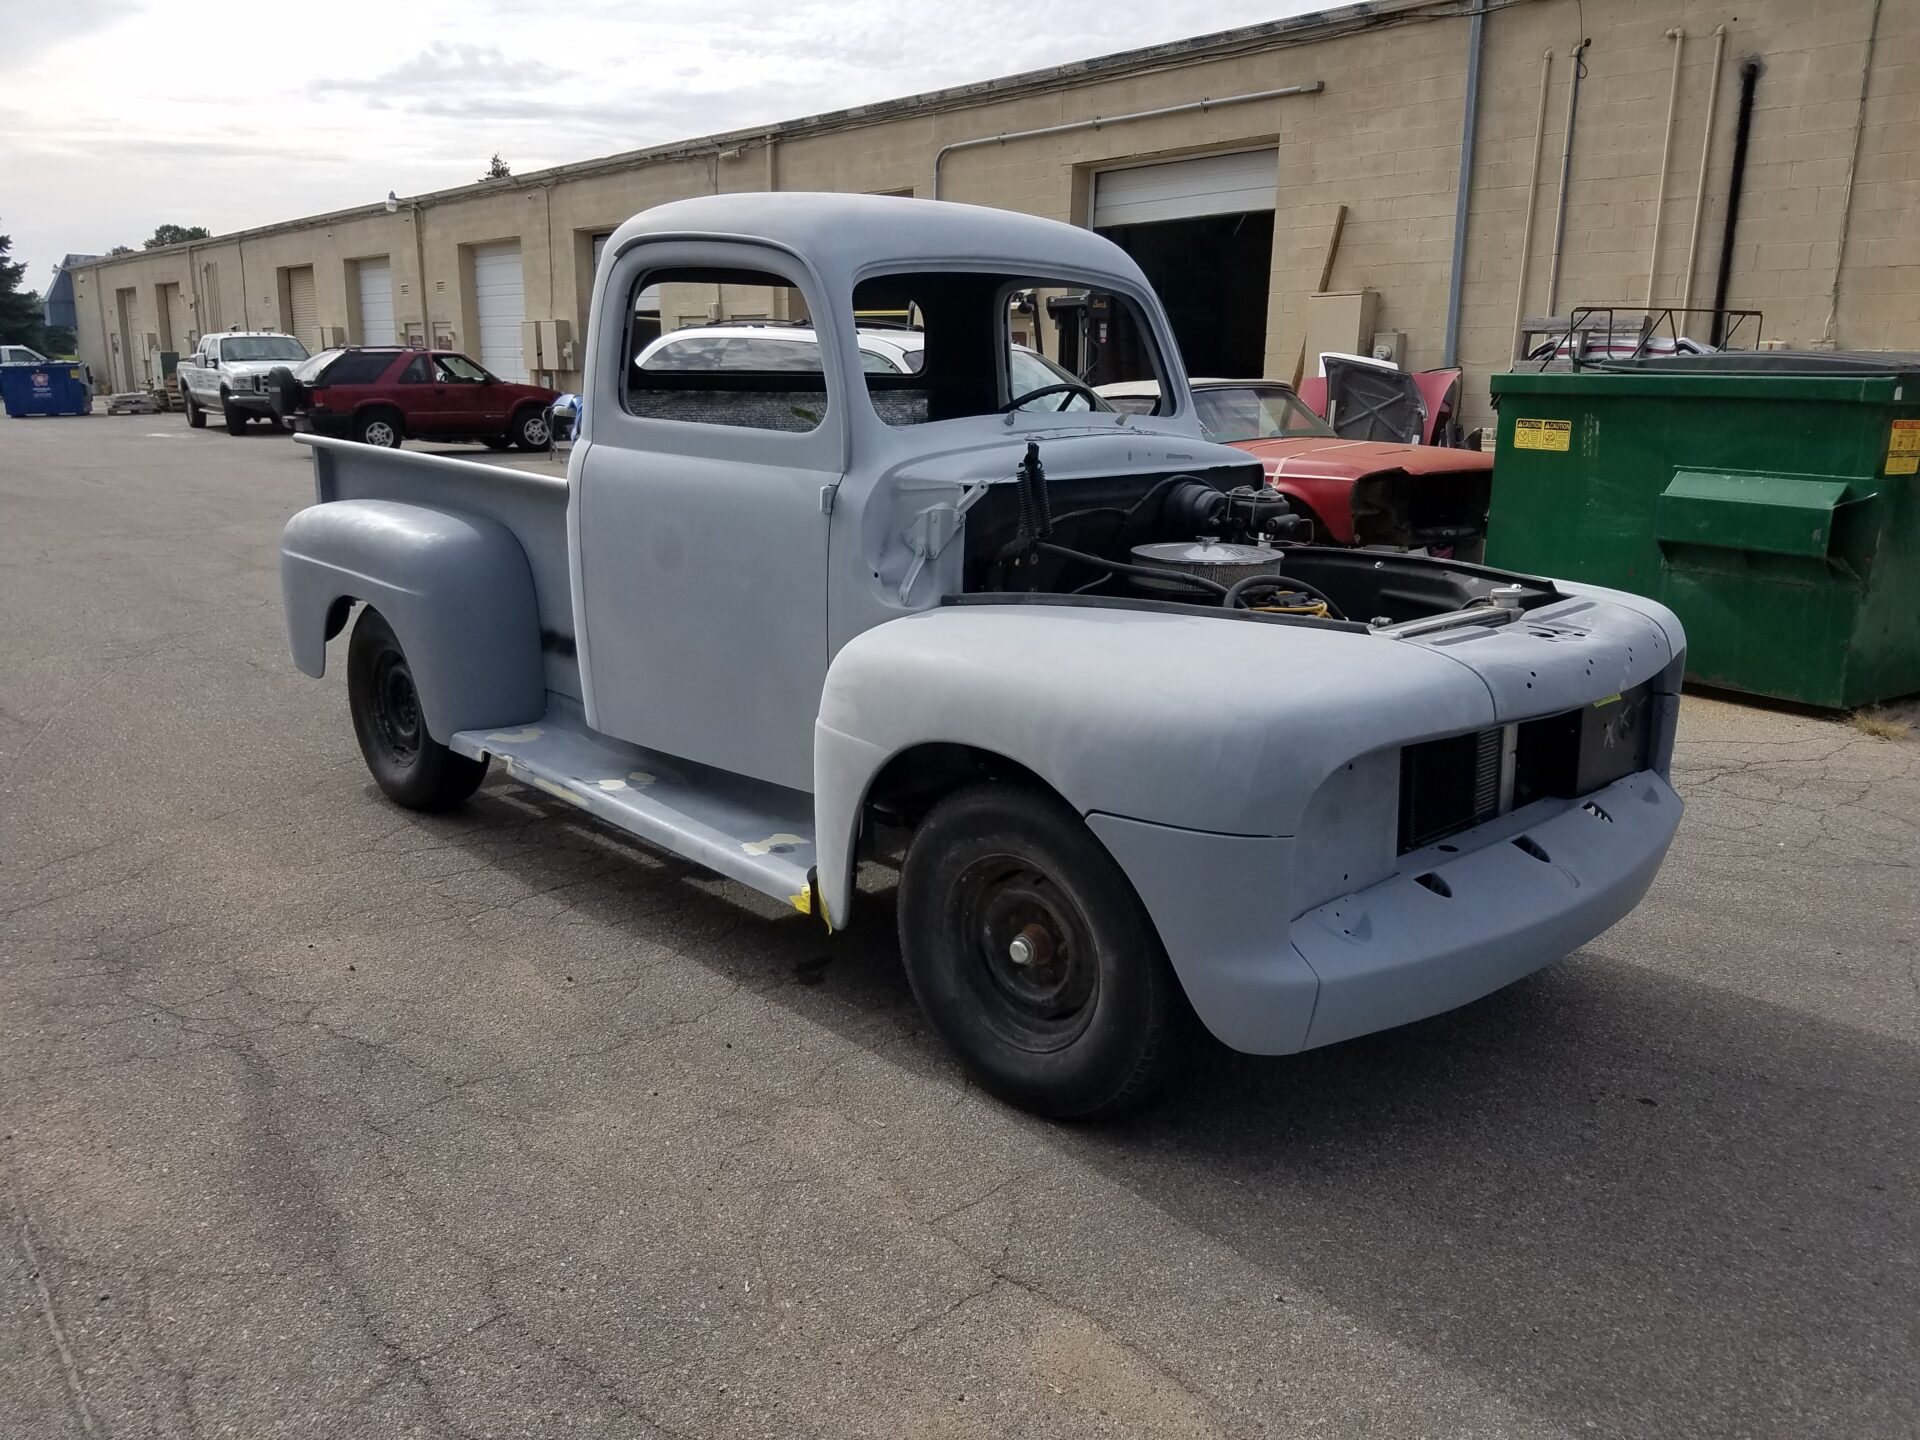 An unpainted 1952 Ford F100 model